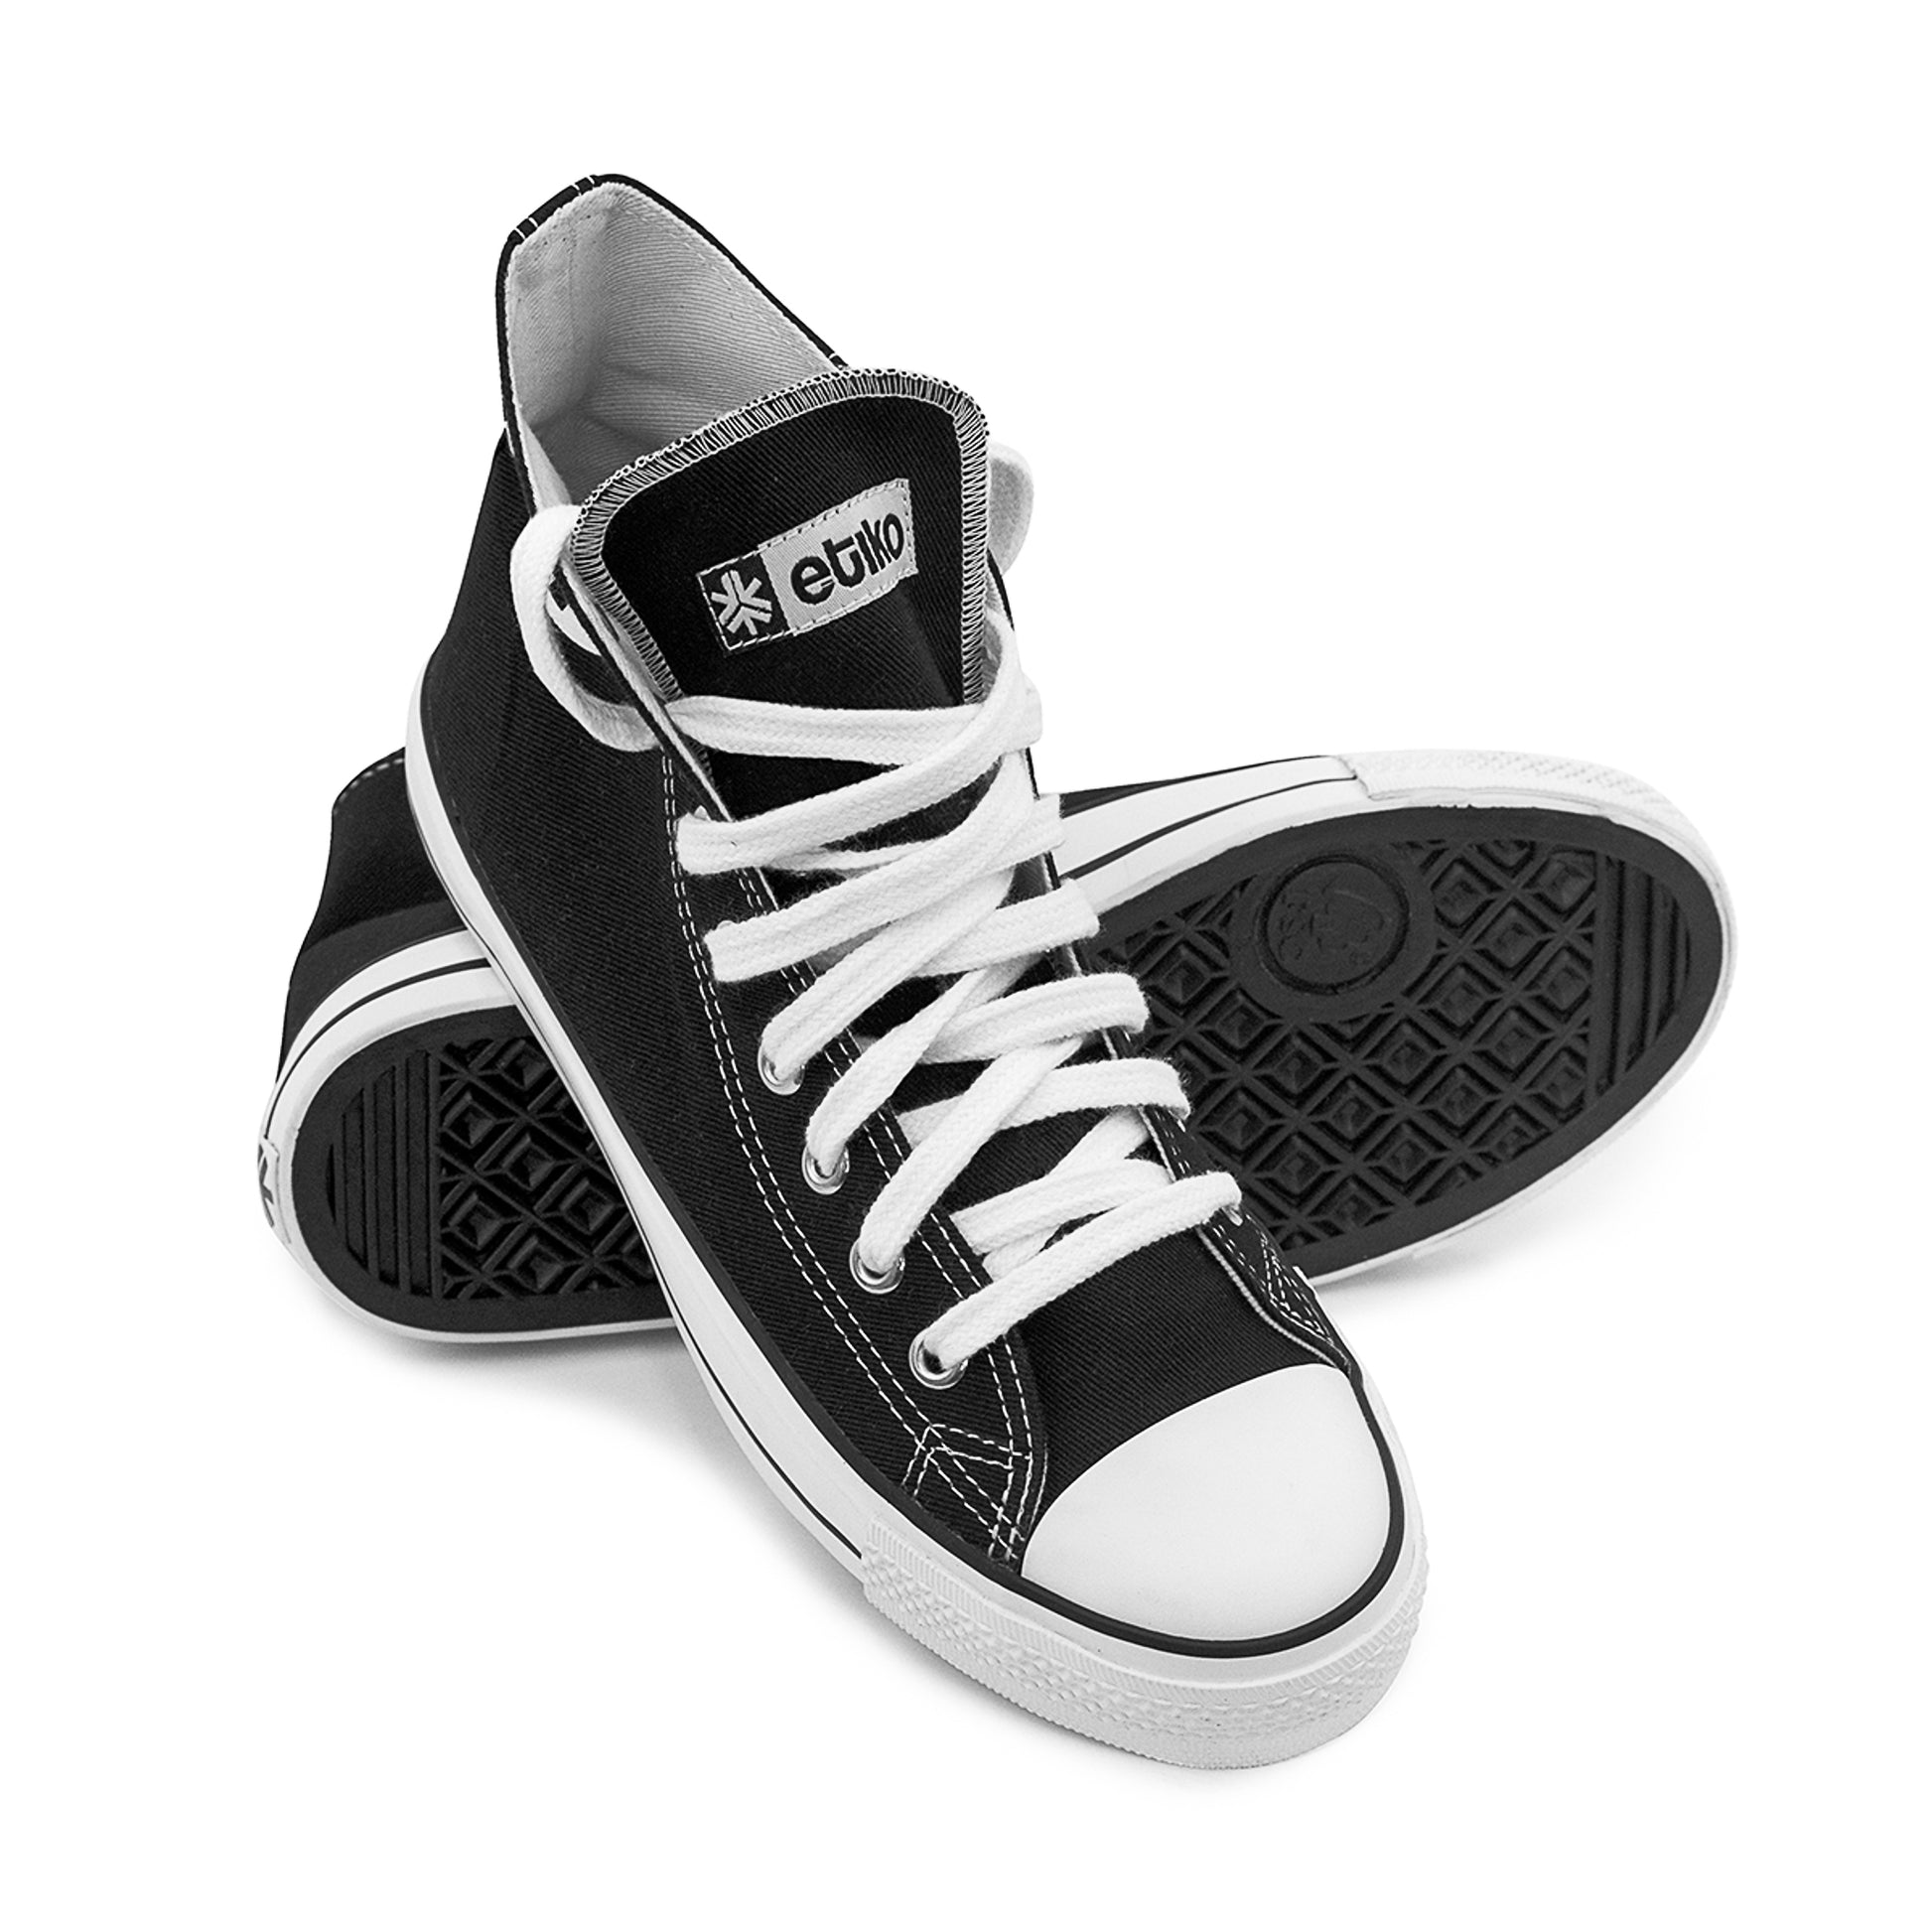 Black & White High Top Sneakers